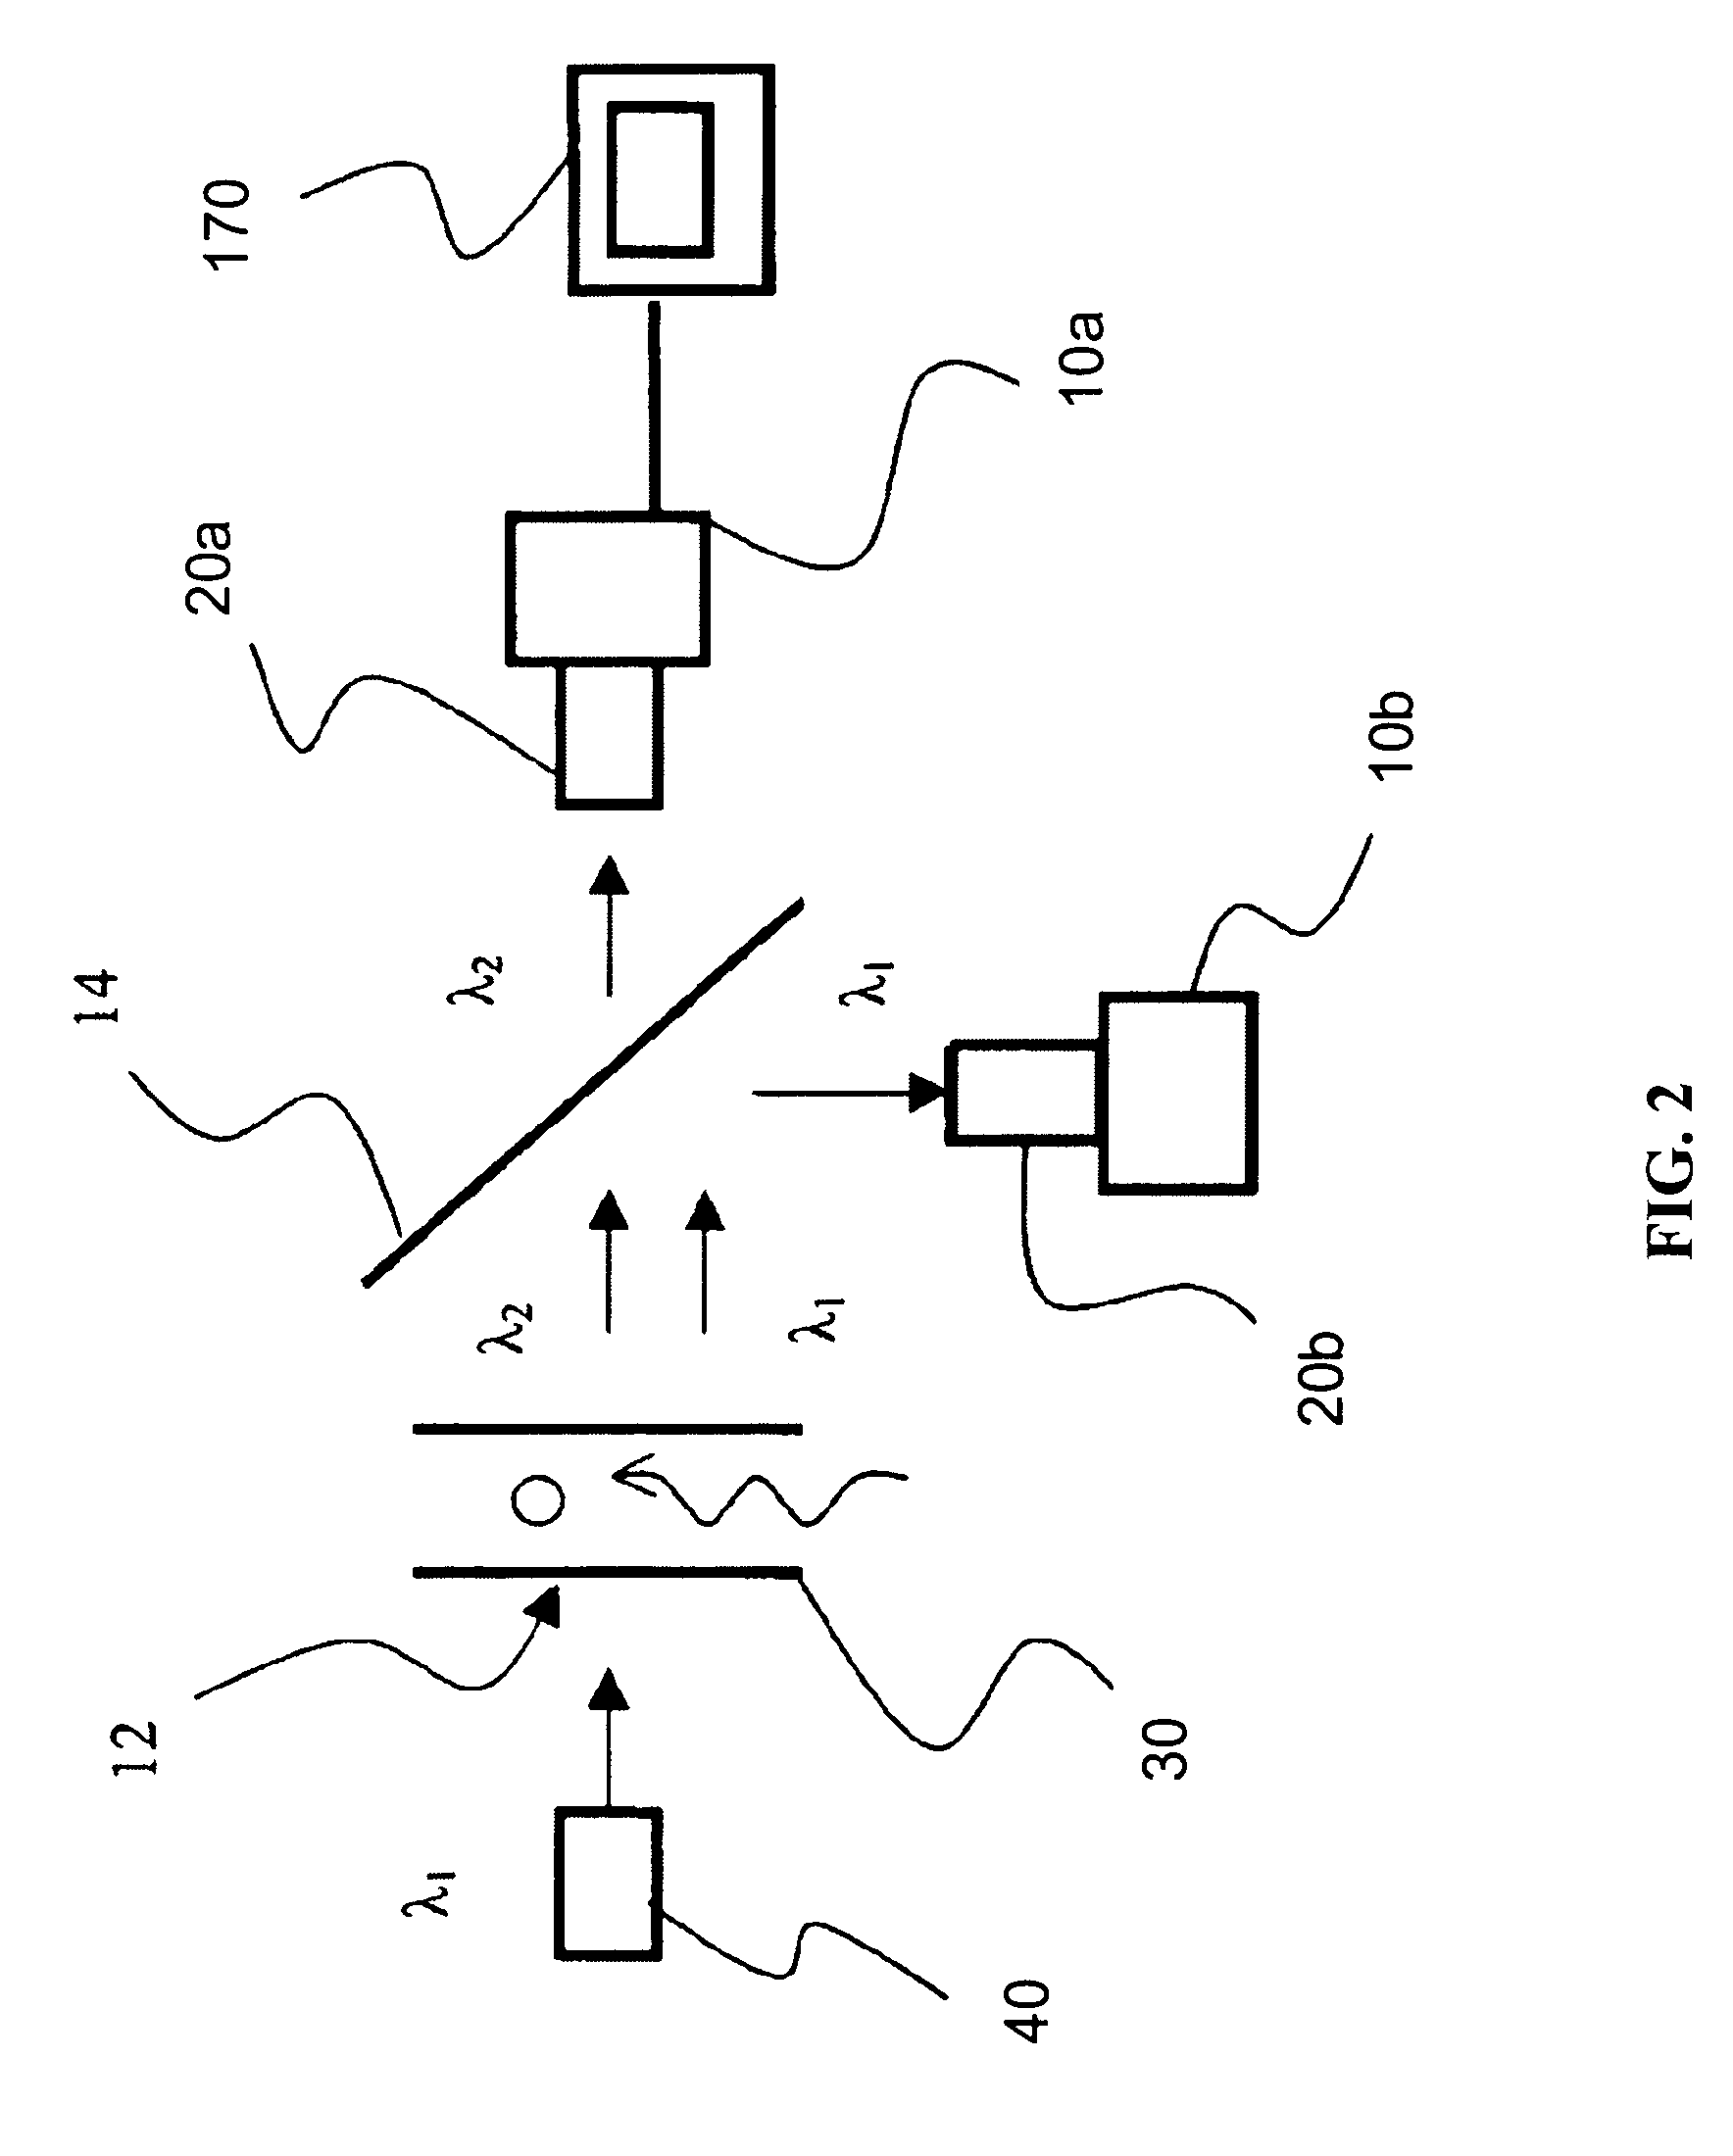 Particle imaging system with a varying flow rate